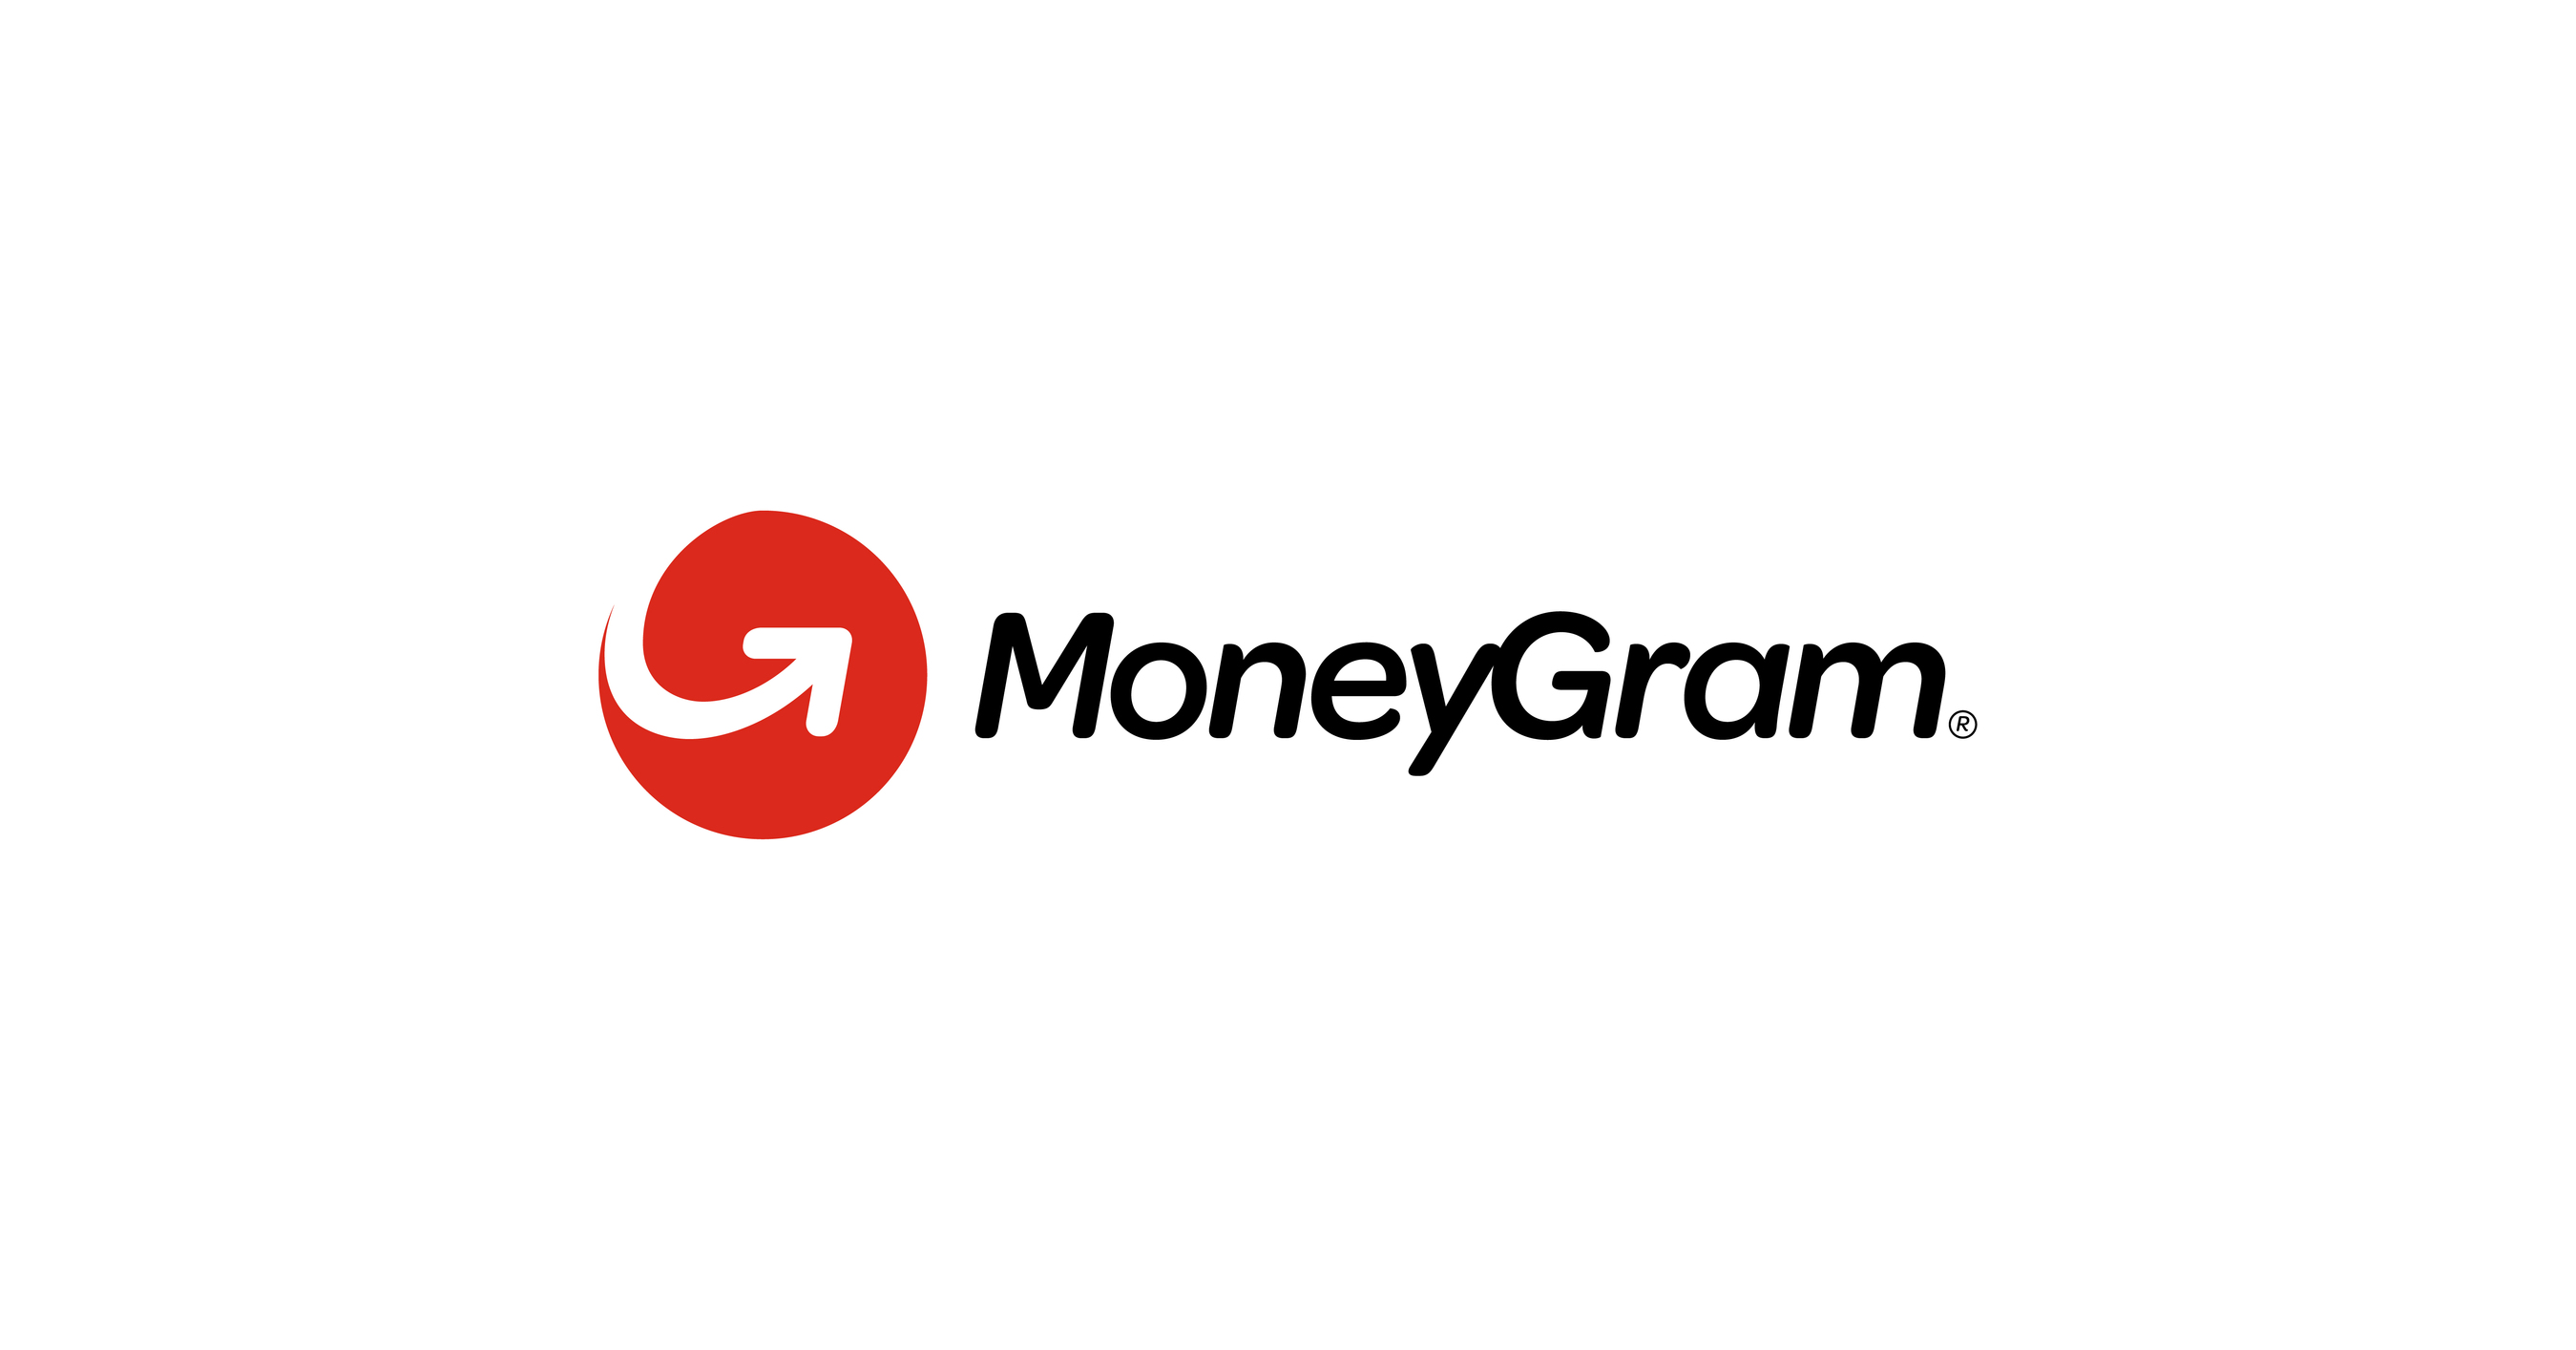 MoneyGram Continues to Scale Digital Receive Network with New Account